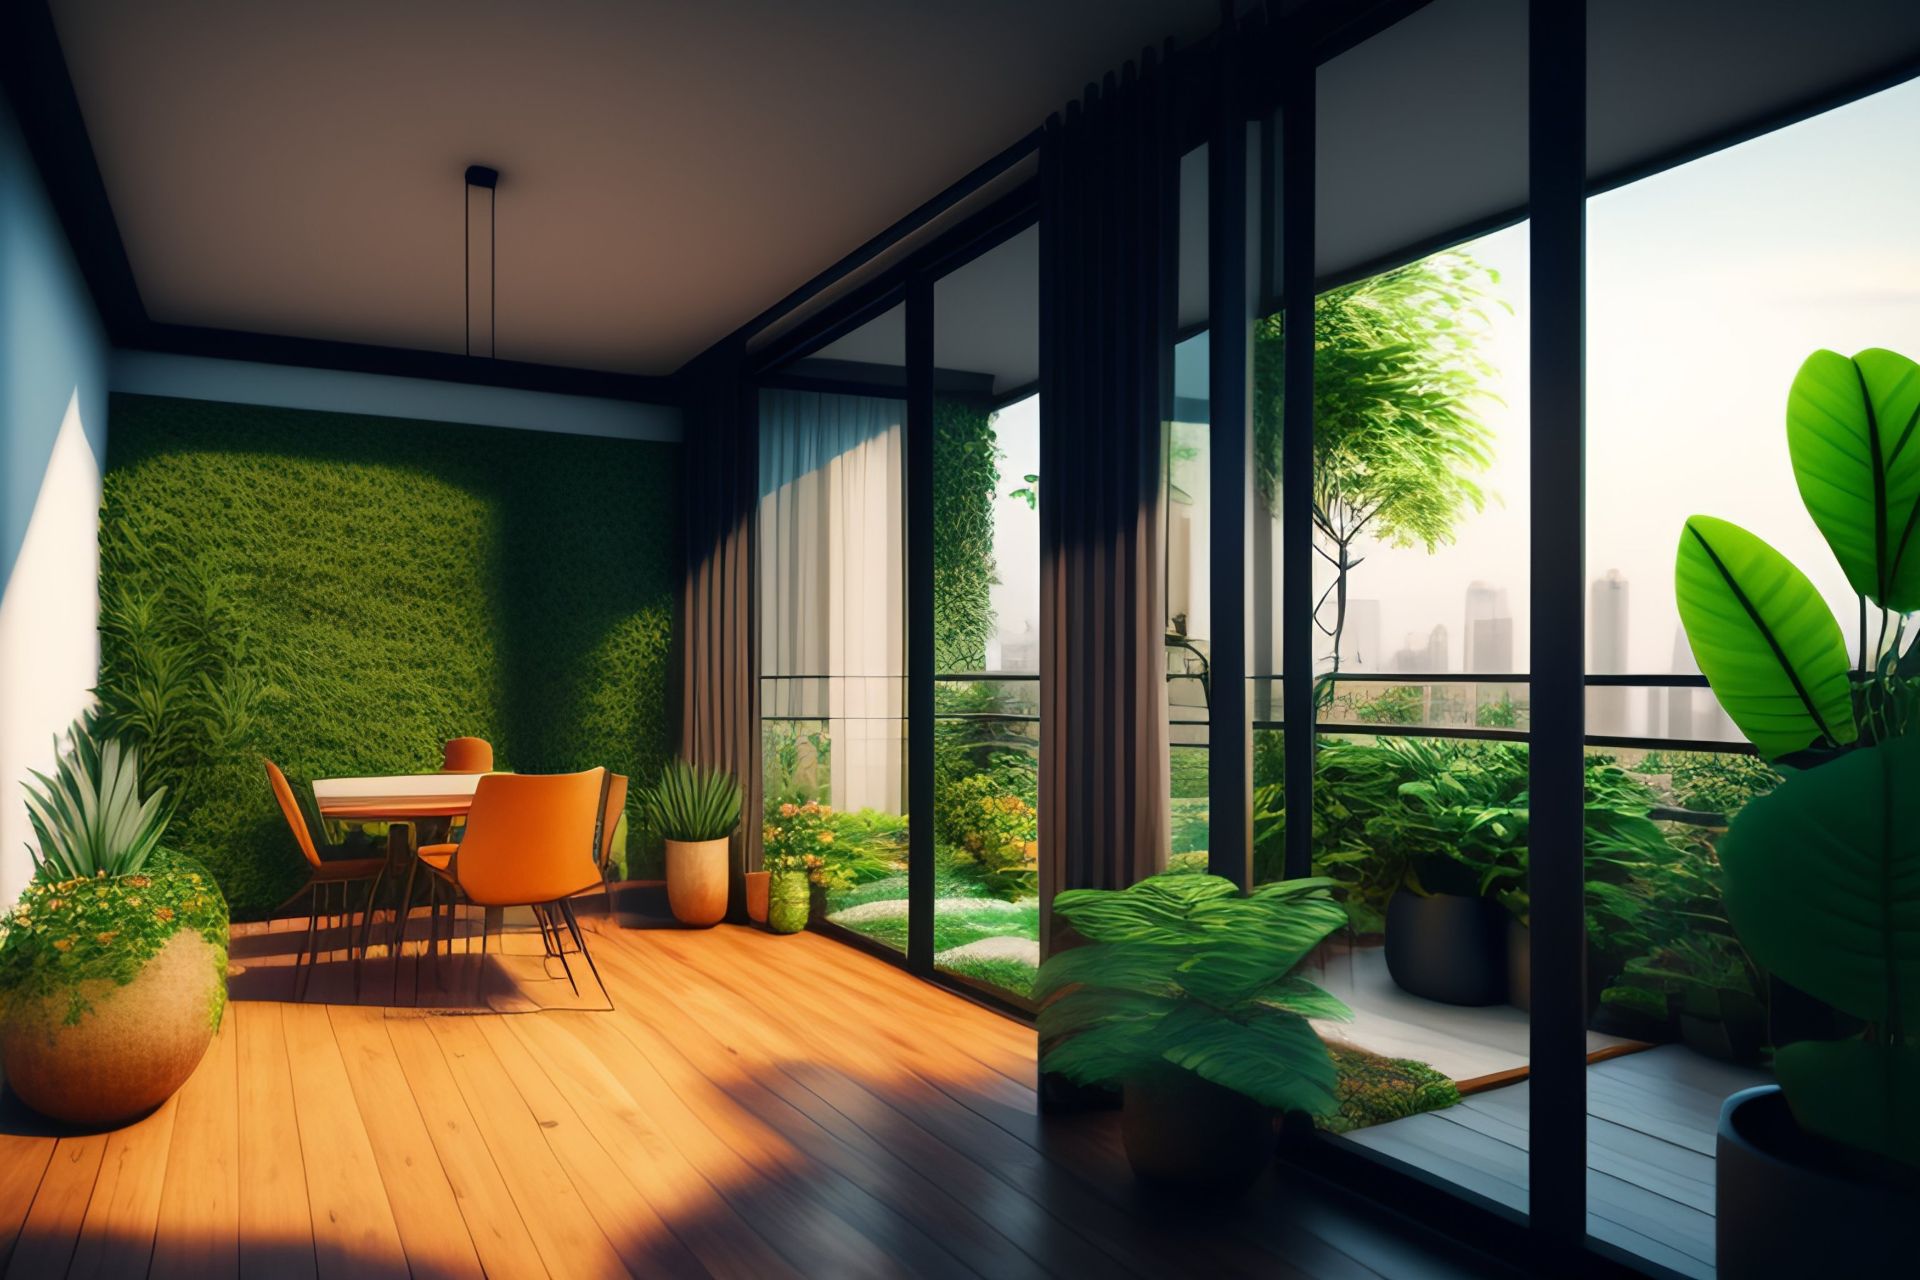 living-room-with-green-wall-table-with-orange-chairs-plants (1)